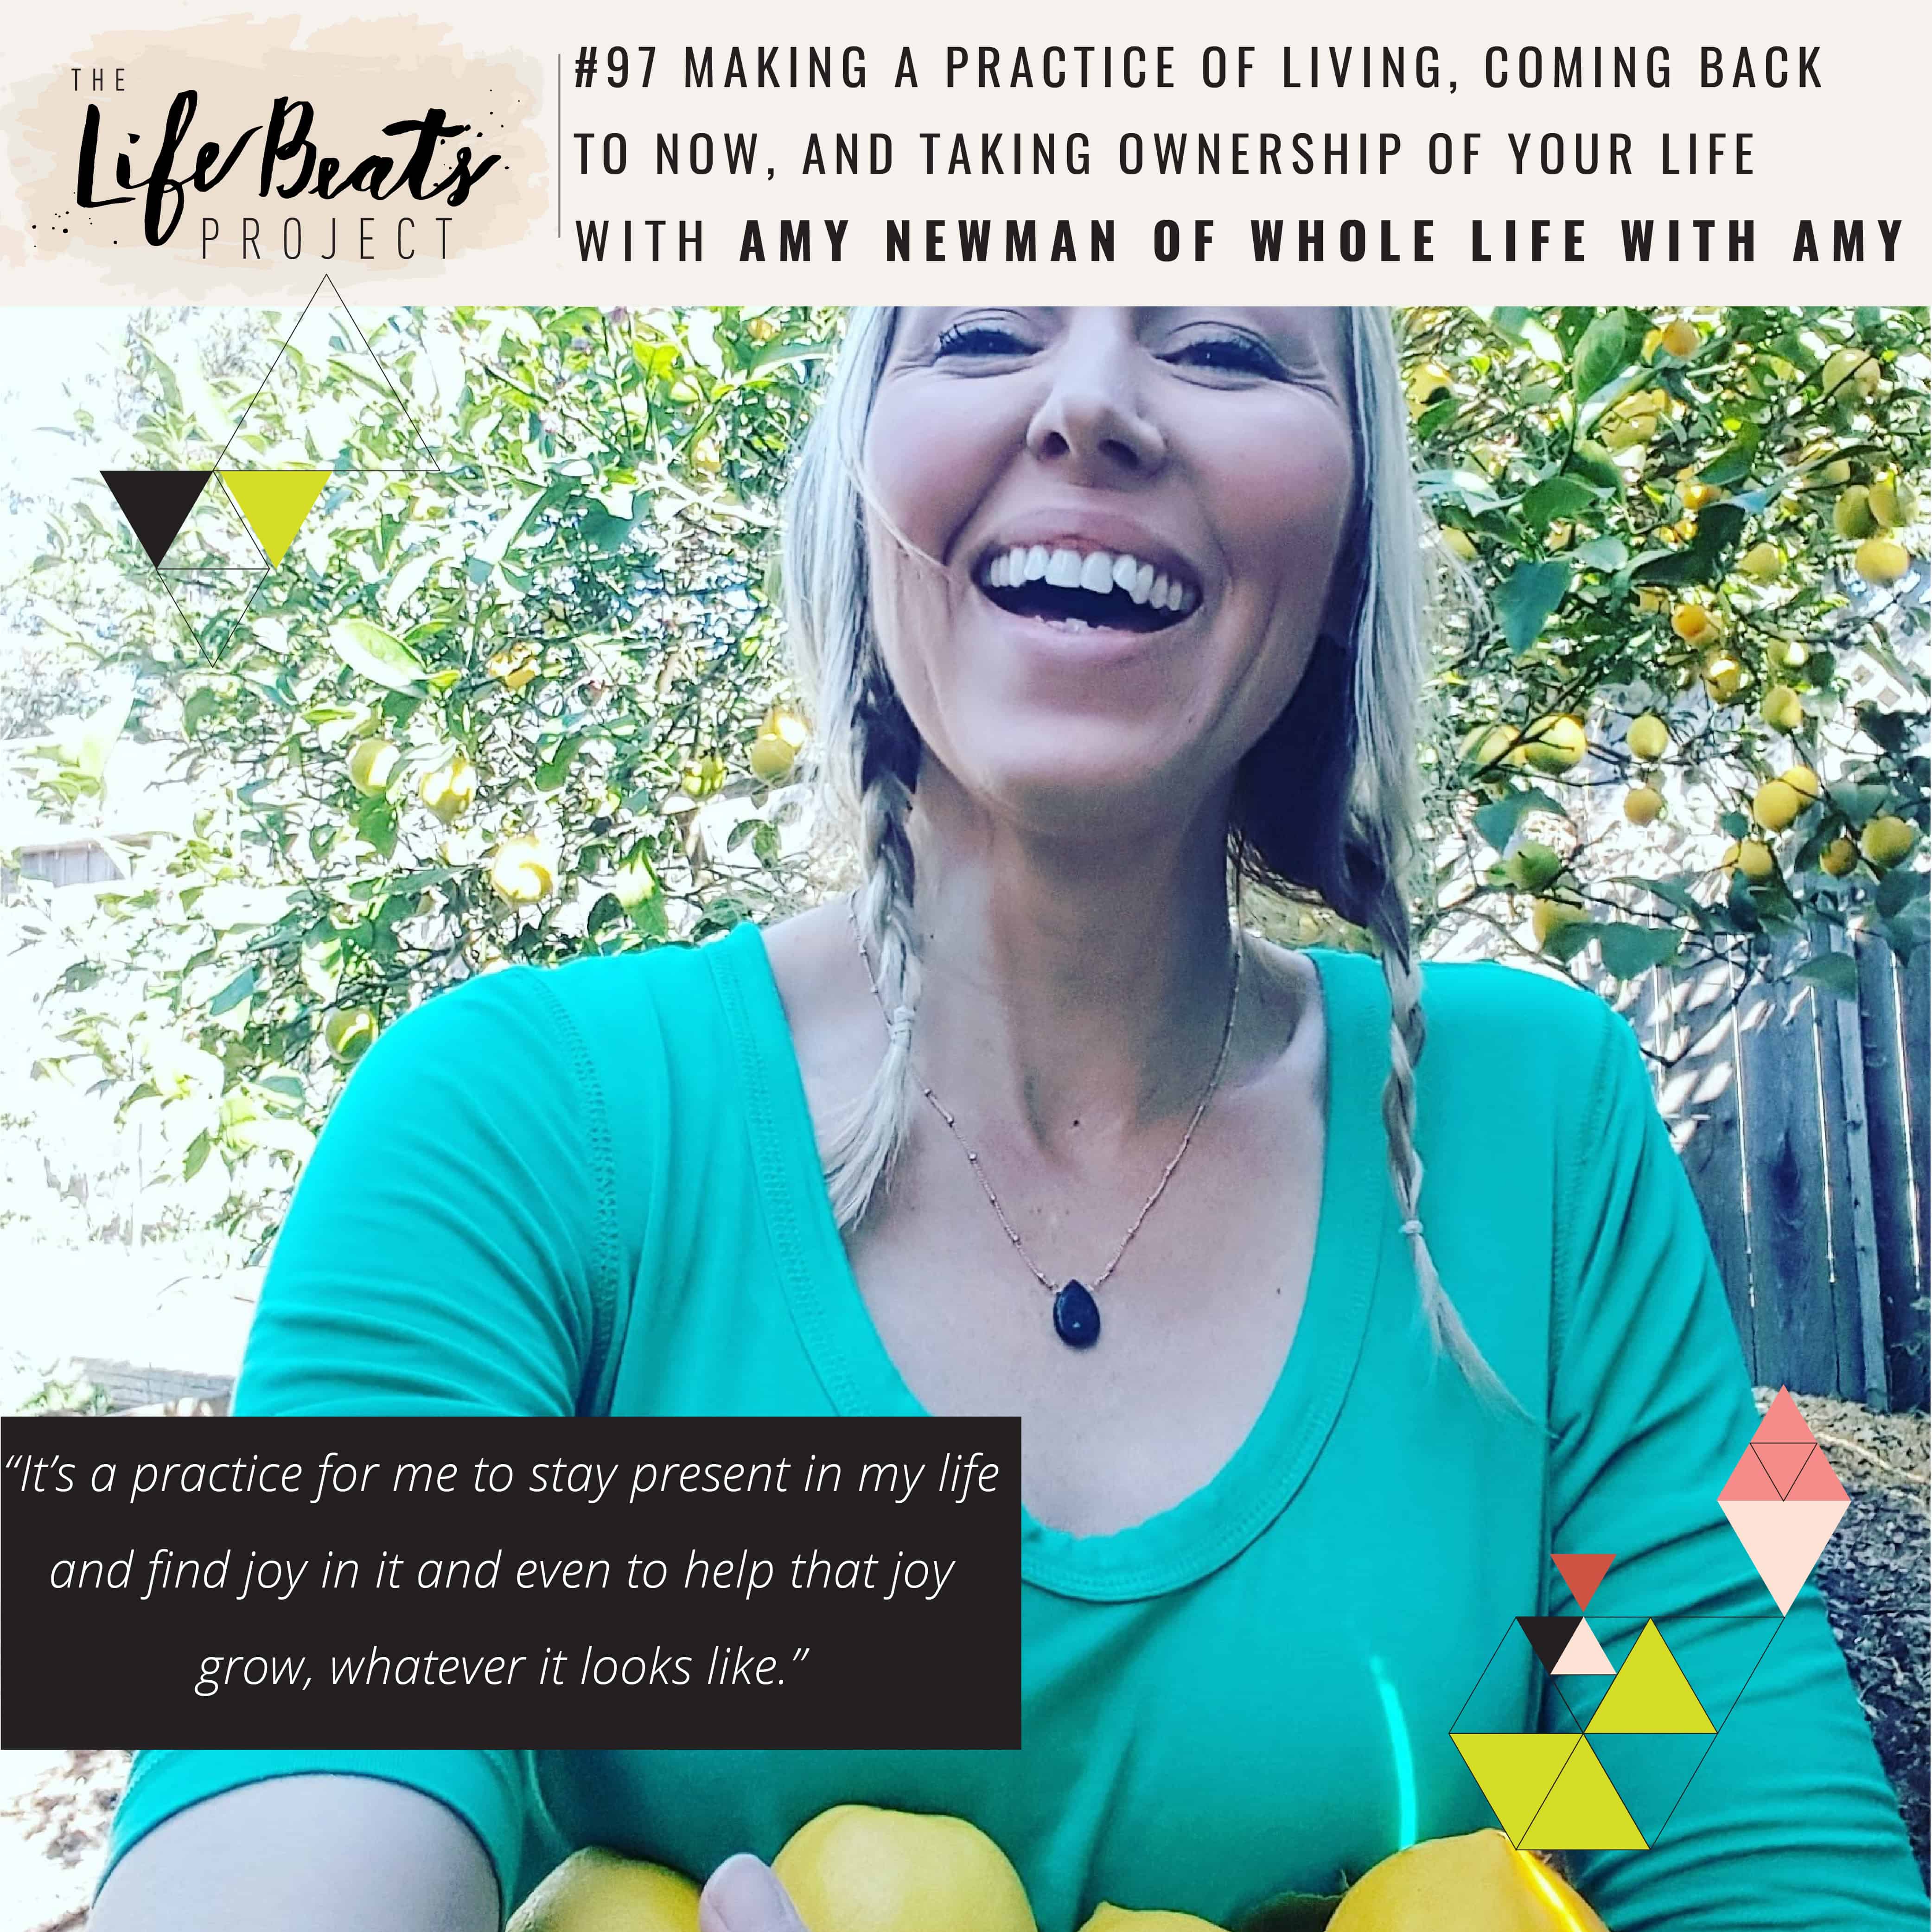 whole life amy newman plant based raw lyme disease podcast lifebeats vibrancy ownership health